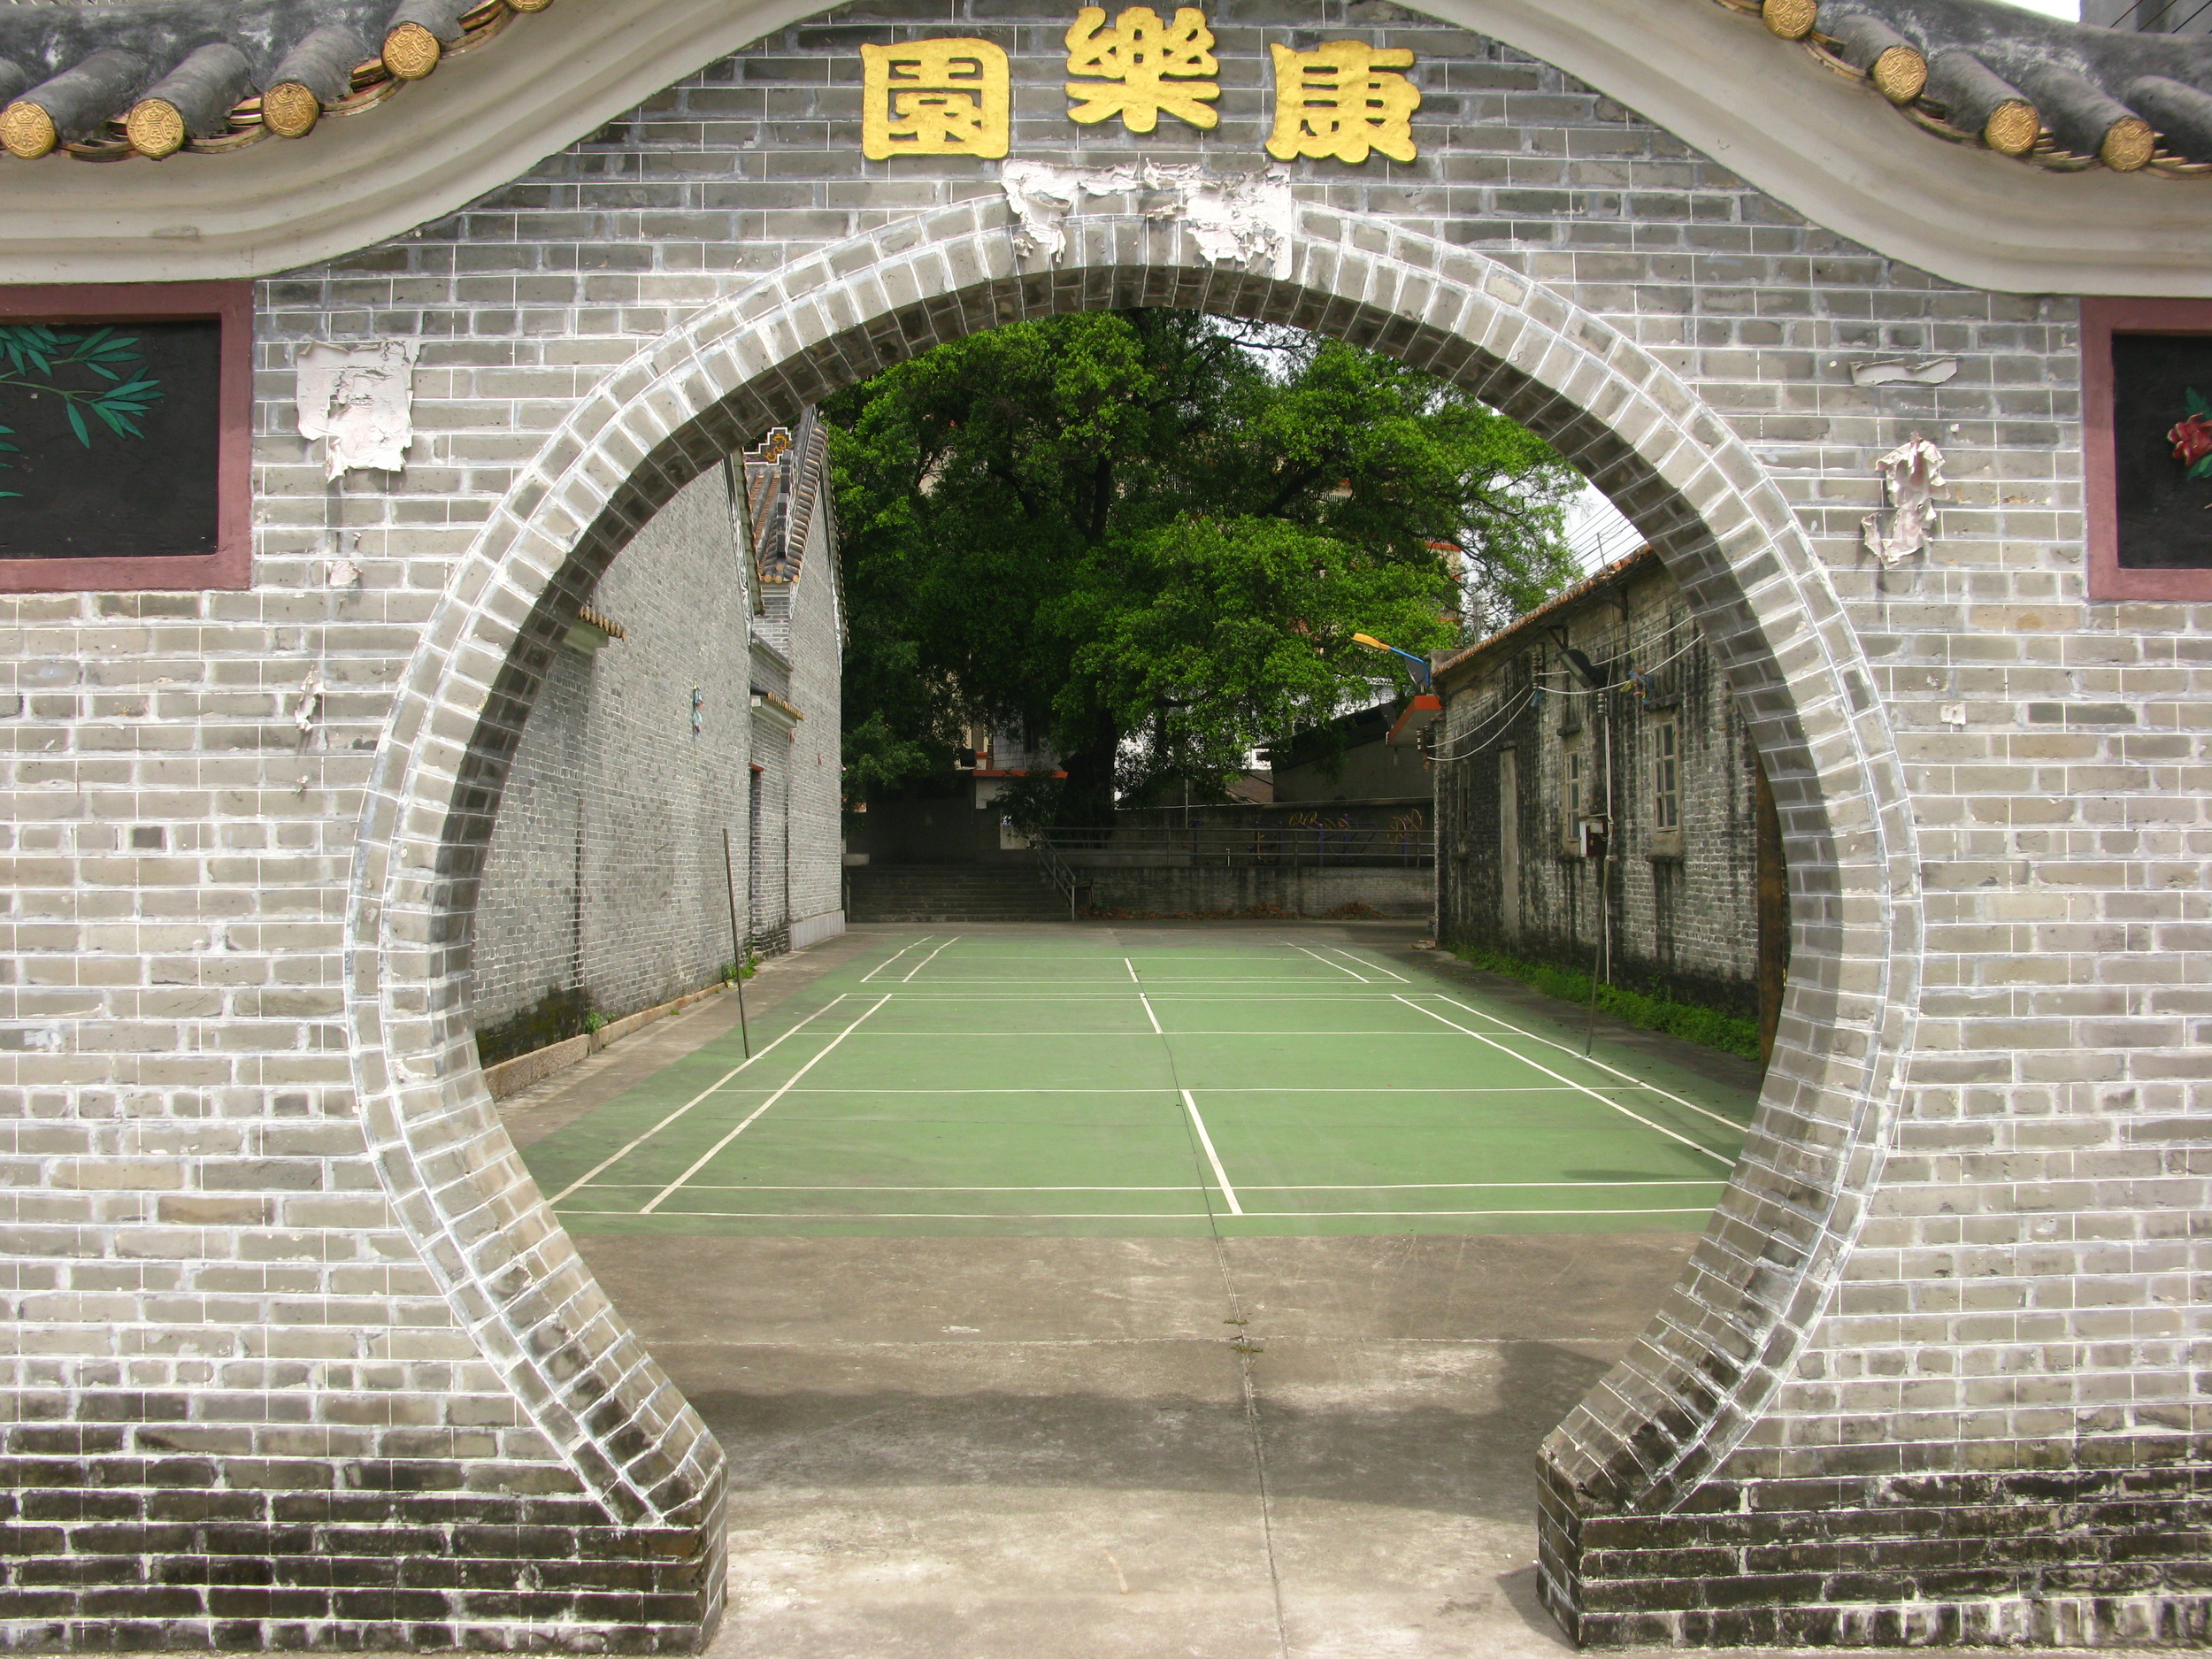 Outside are badminton courts and playground space